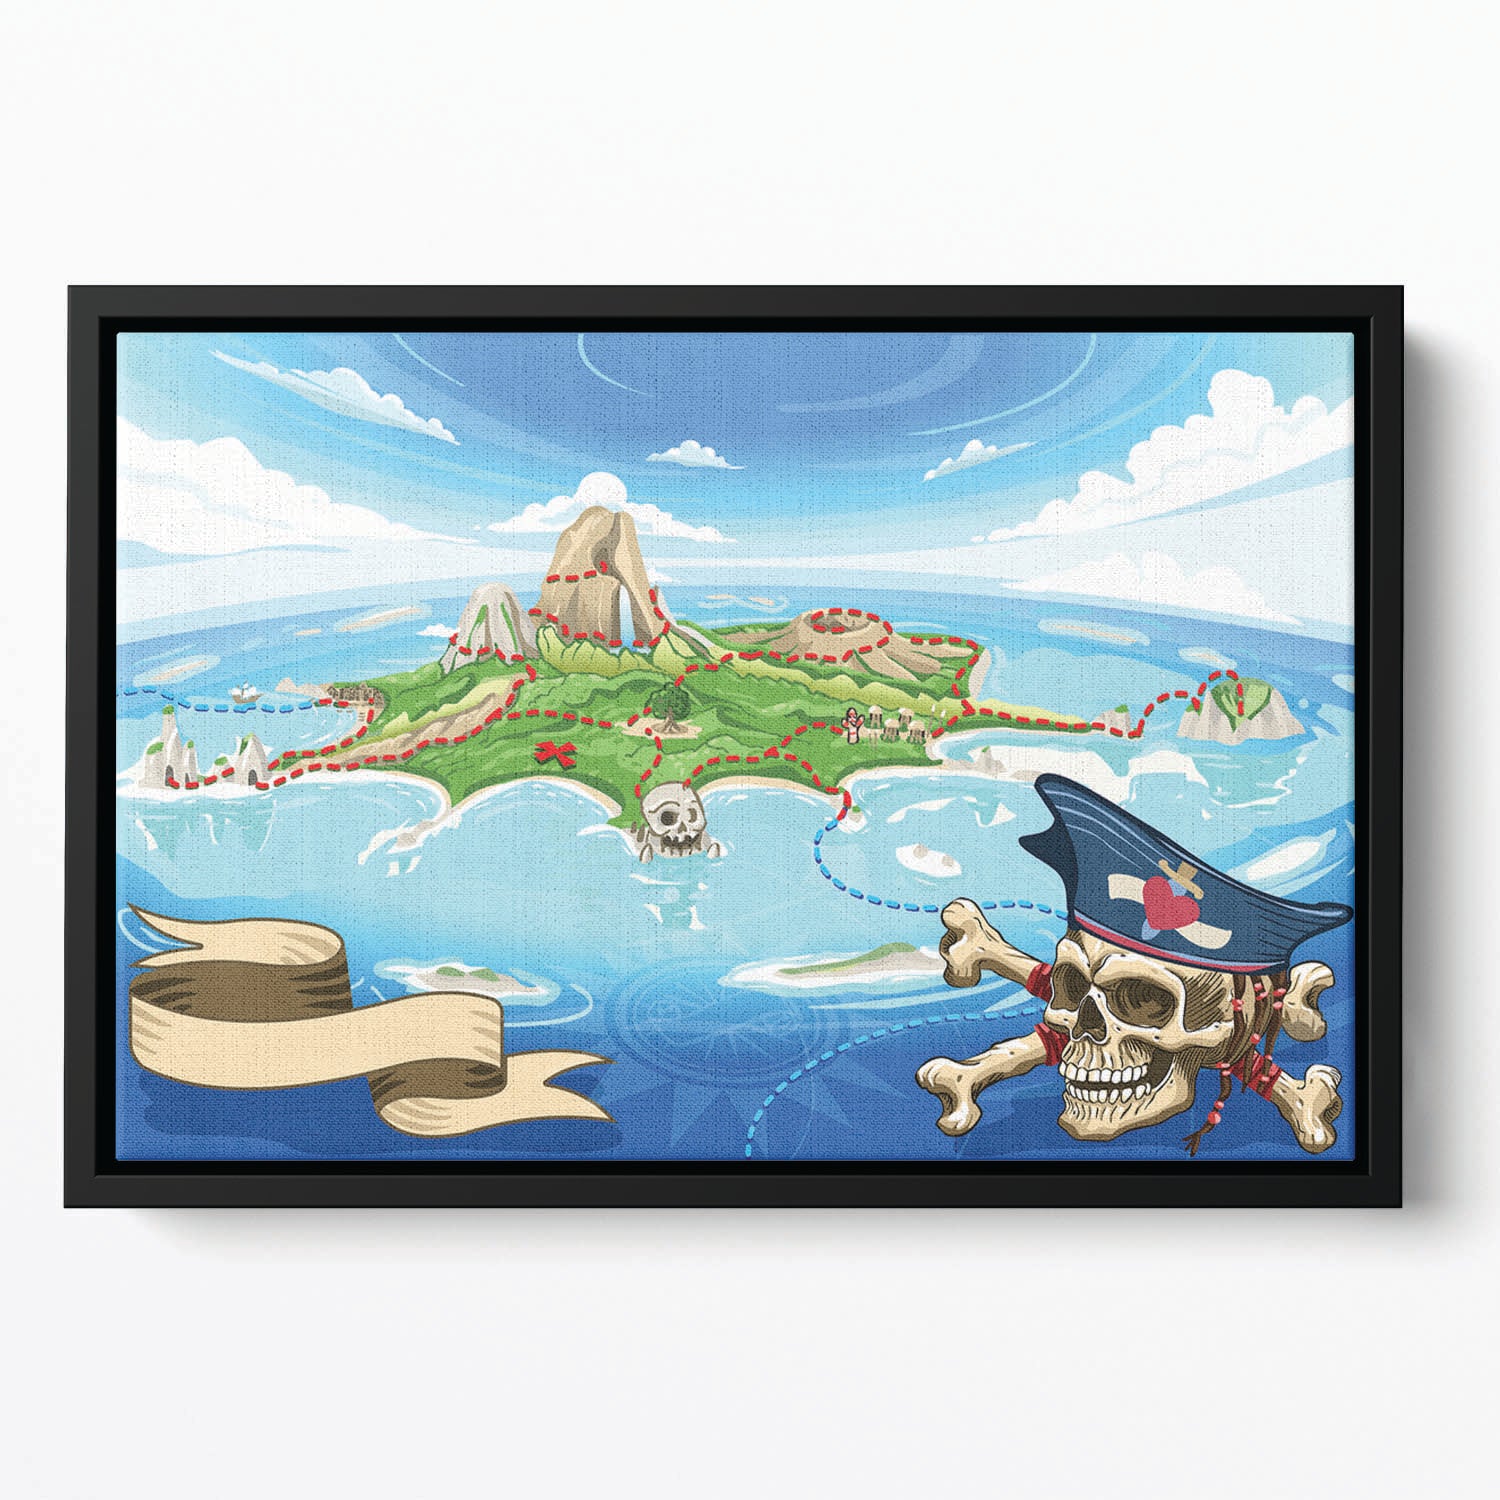 Pirate Cove Island Treasure Map Floating Framed Canvas